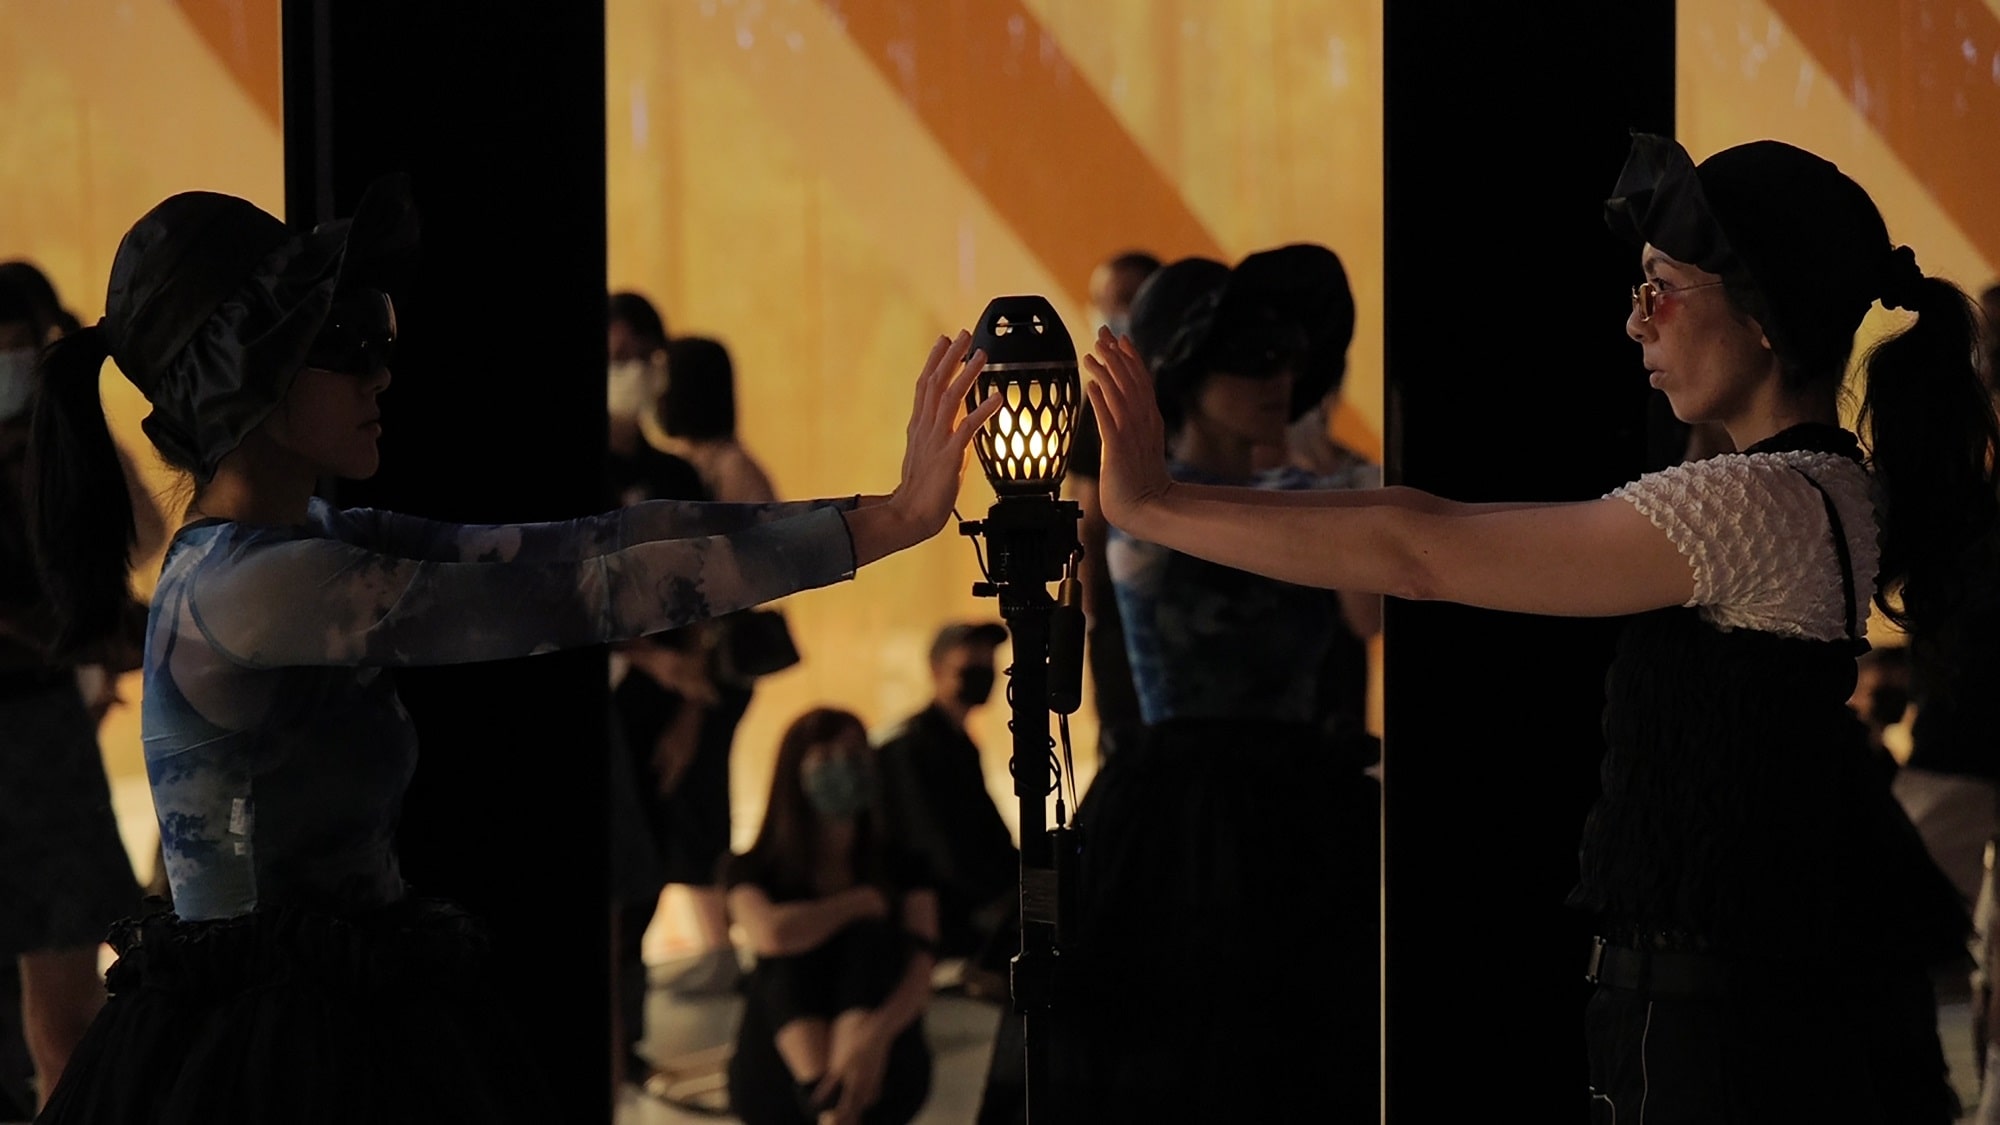 This image is of two women standing in front of the mirror and touching a torch shaped lamp.